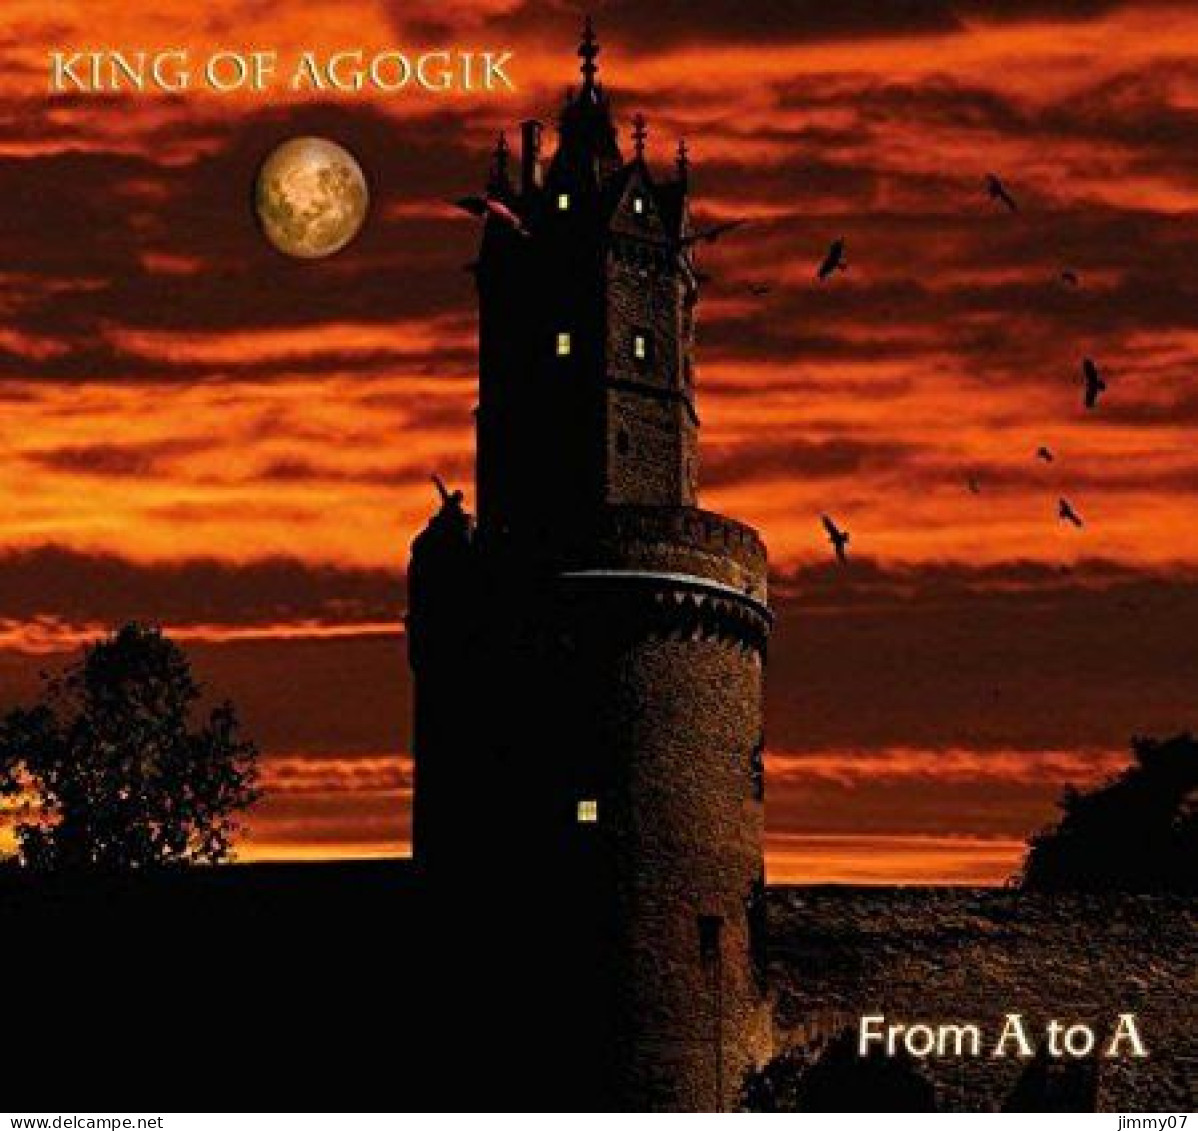 King Of Agogik - From A To A (CD, Album) - Rock